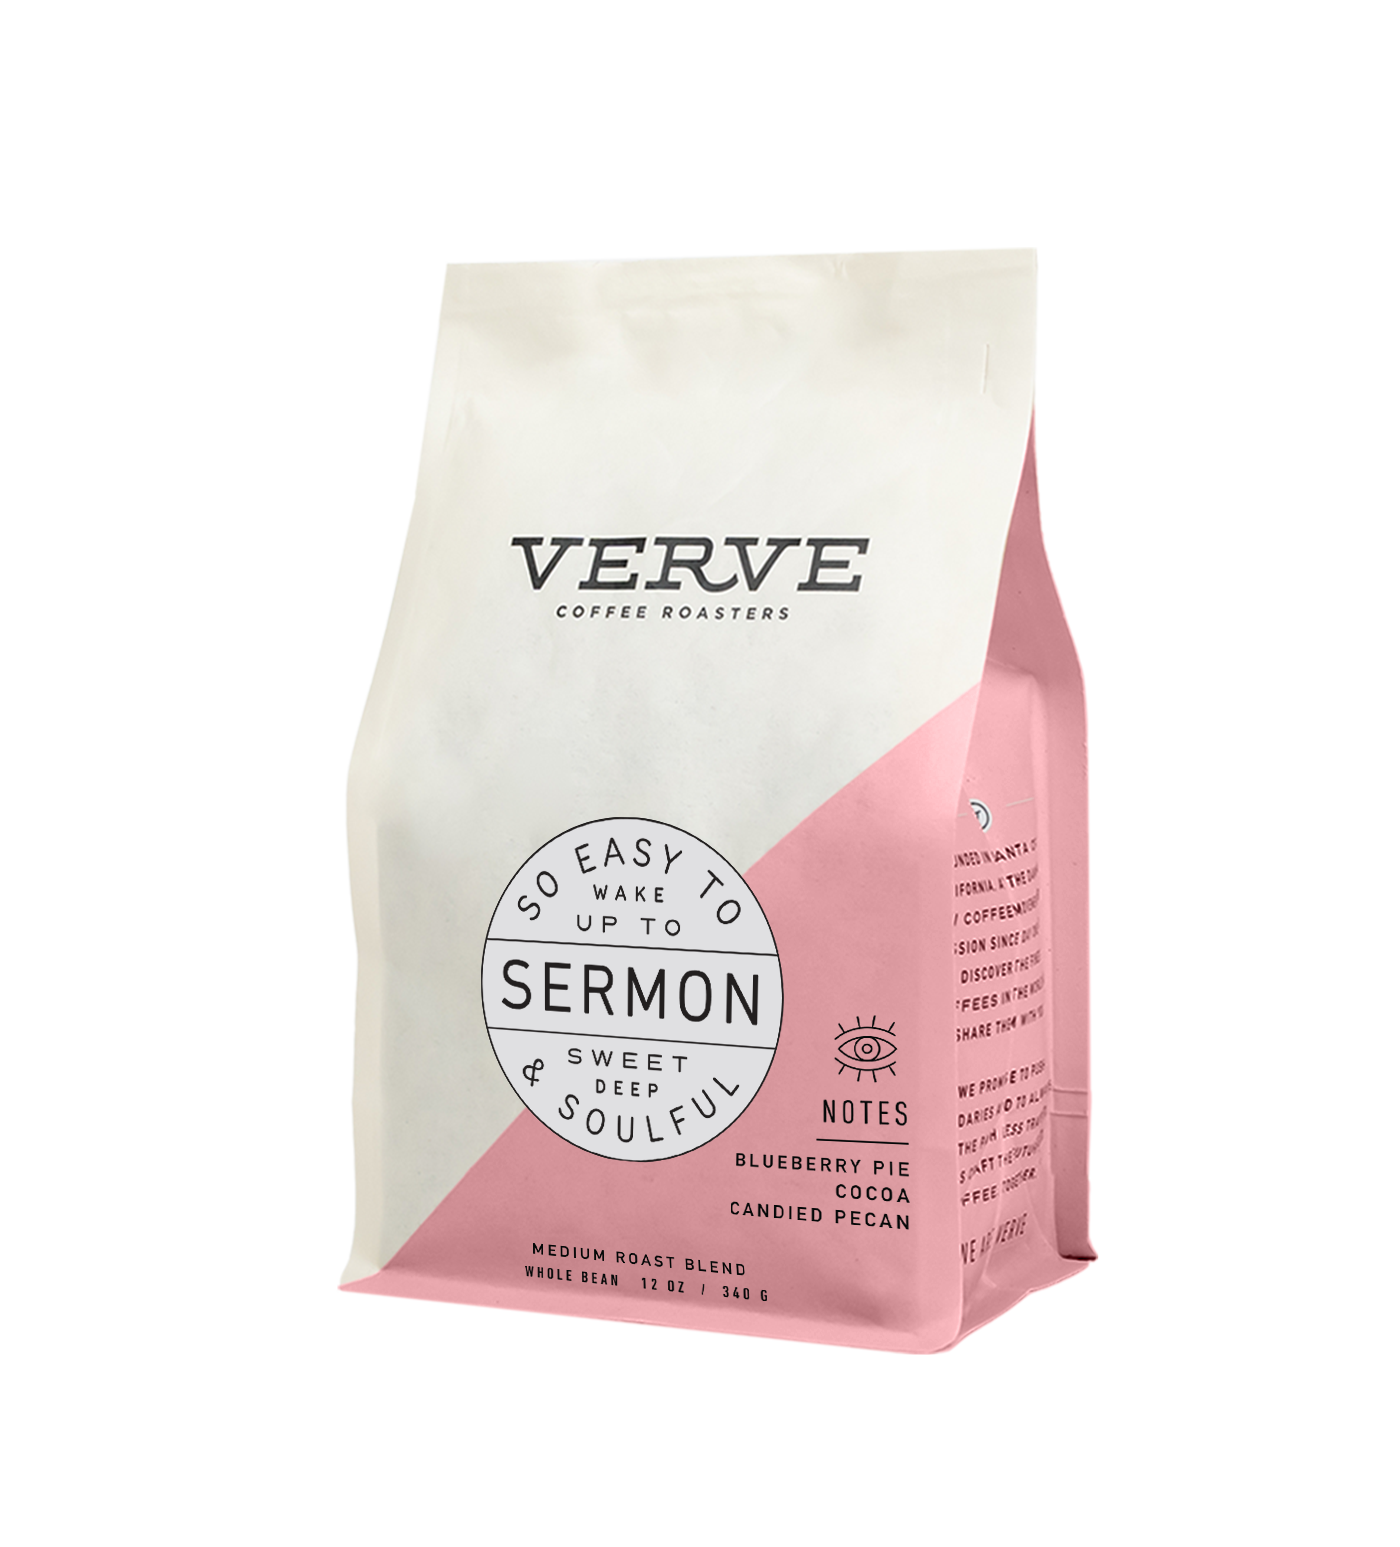 2 Oz. Coffee Sample Bags BULK ORDERS ONLY 10 or More 